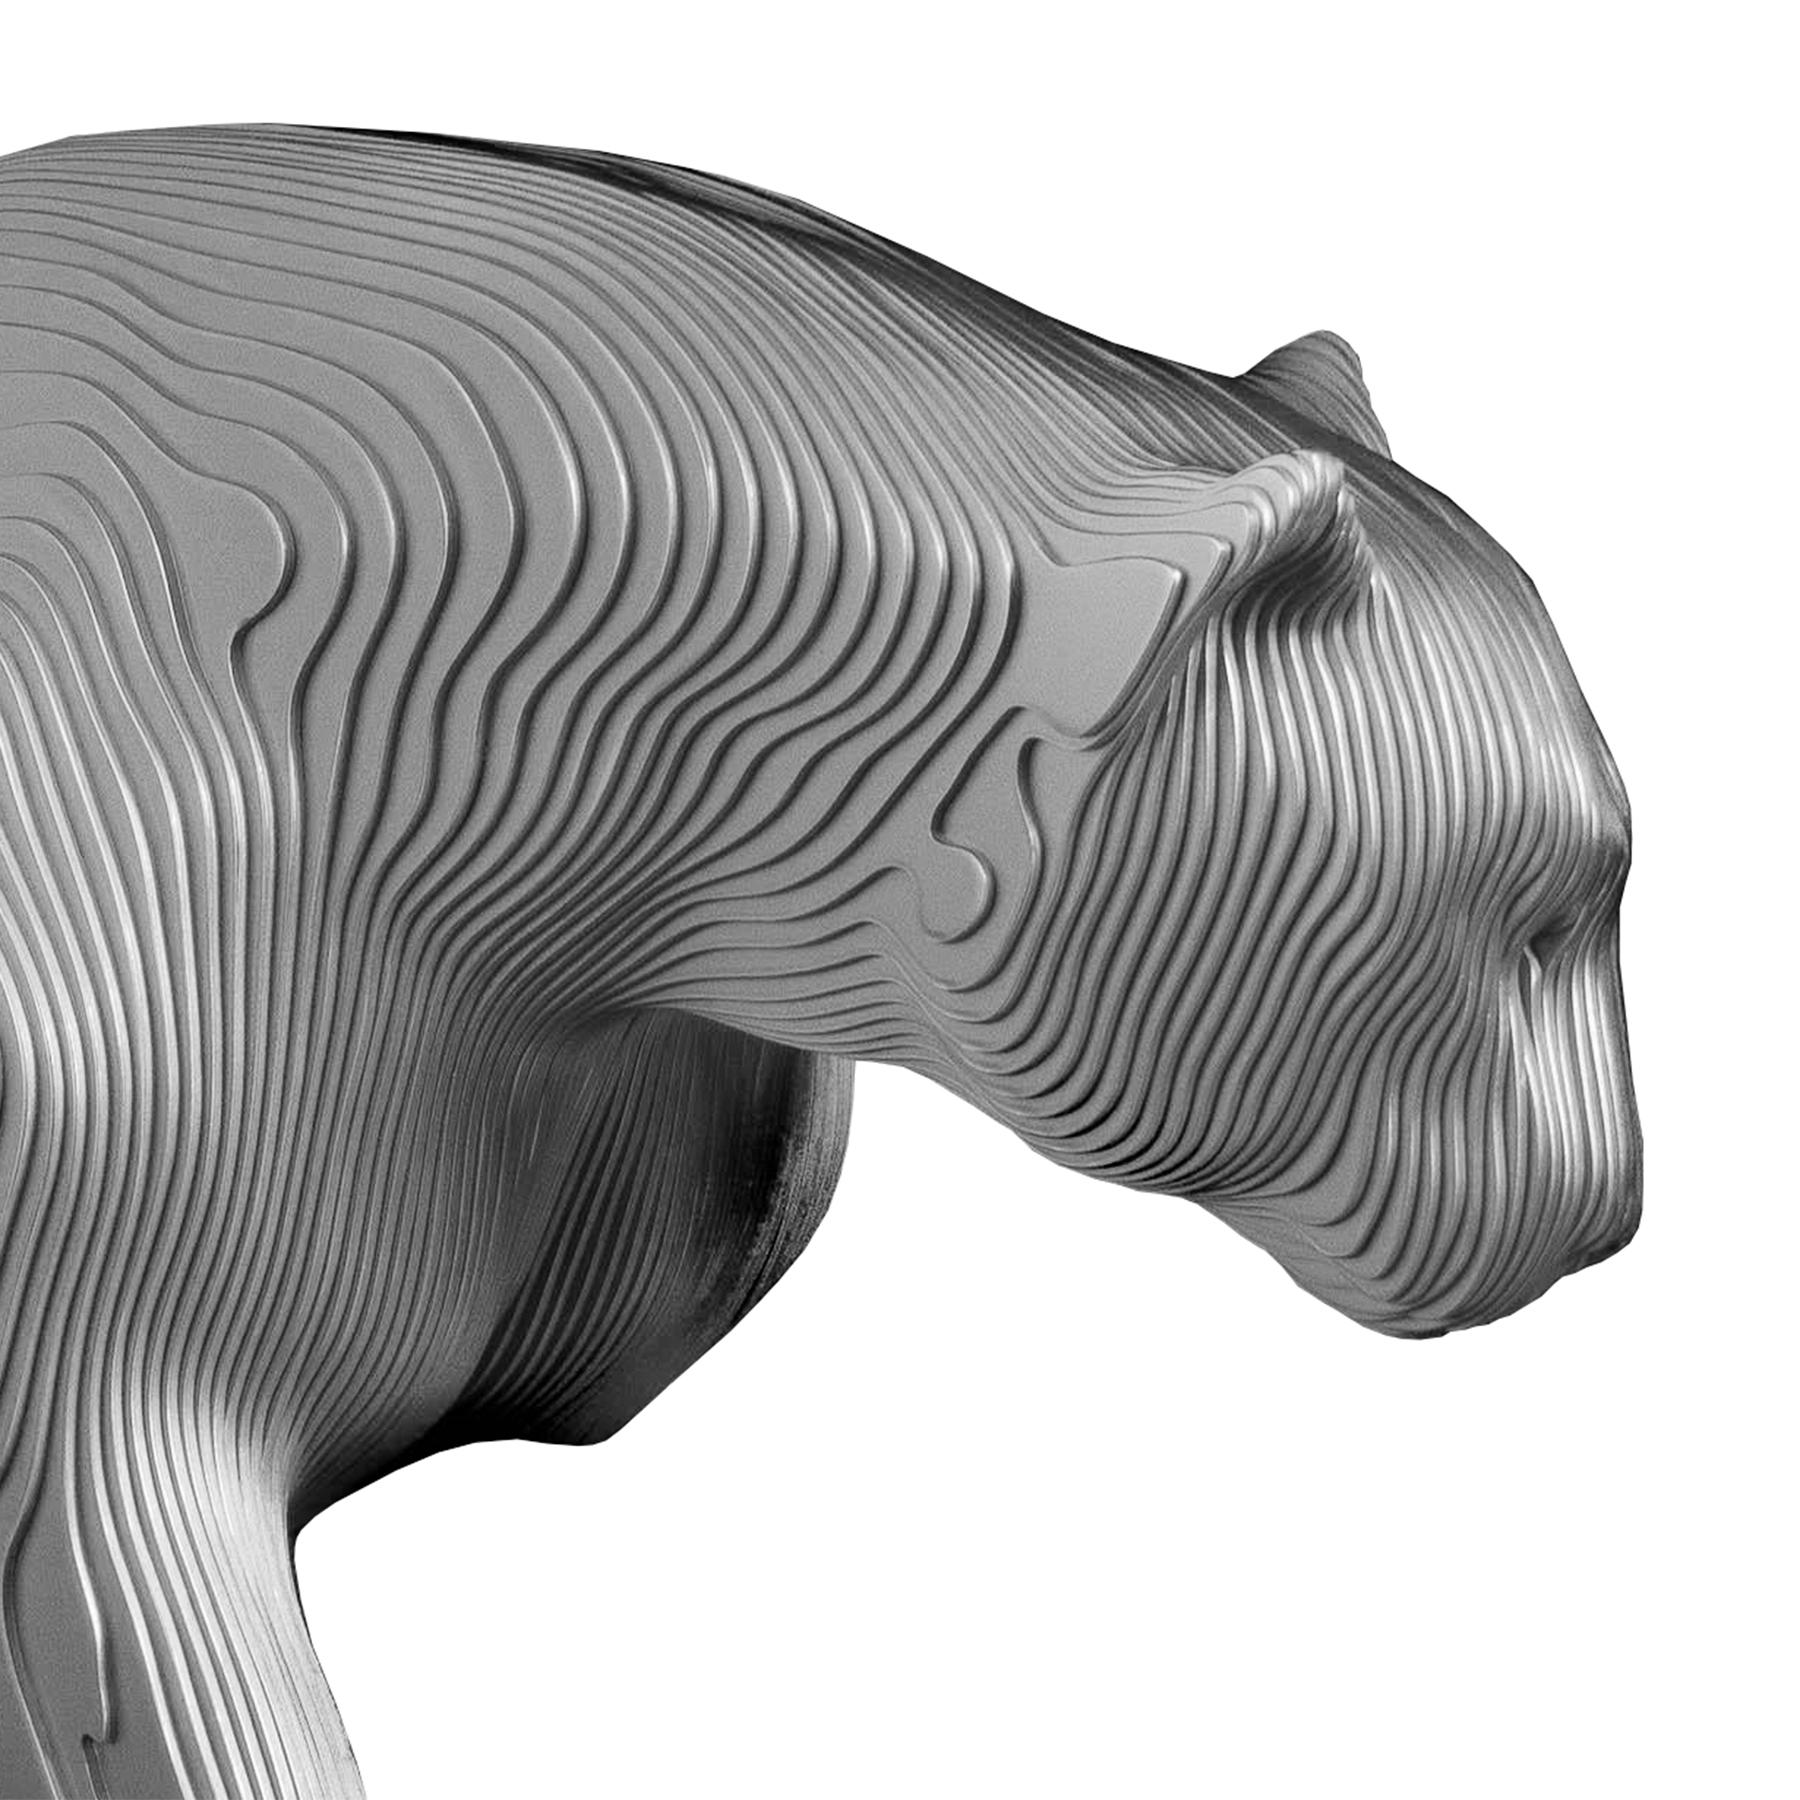 Sculpture Panther polished made with 154 aluminium
hand-crafted plates. Exceptional piece made in welded 
and shaped aluminium into masterful works of contemporary art.